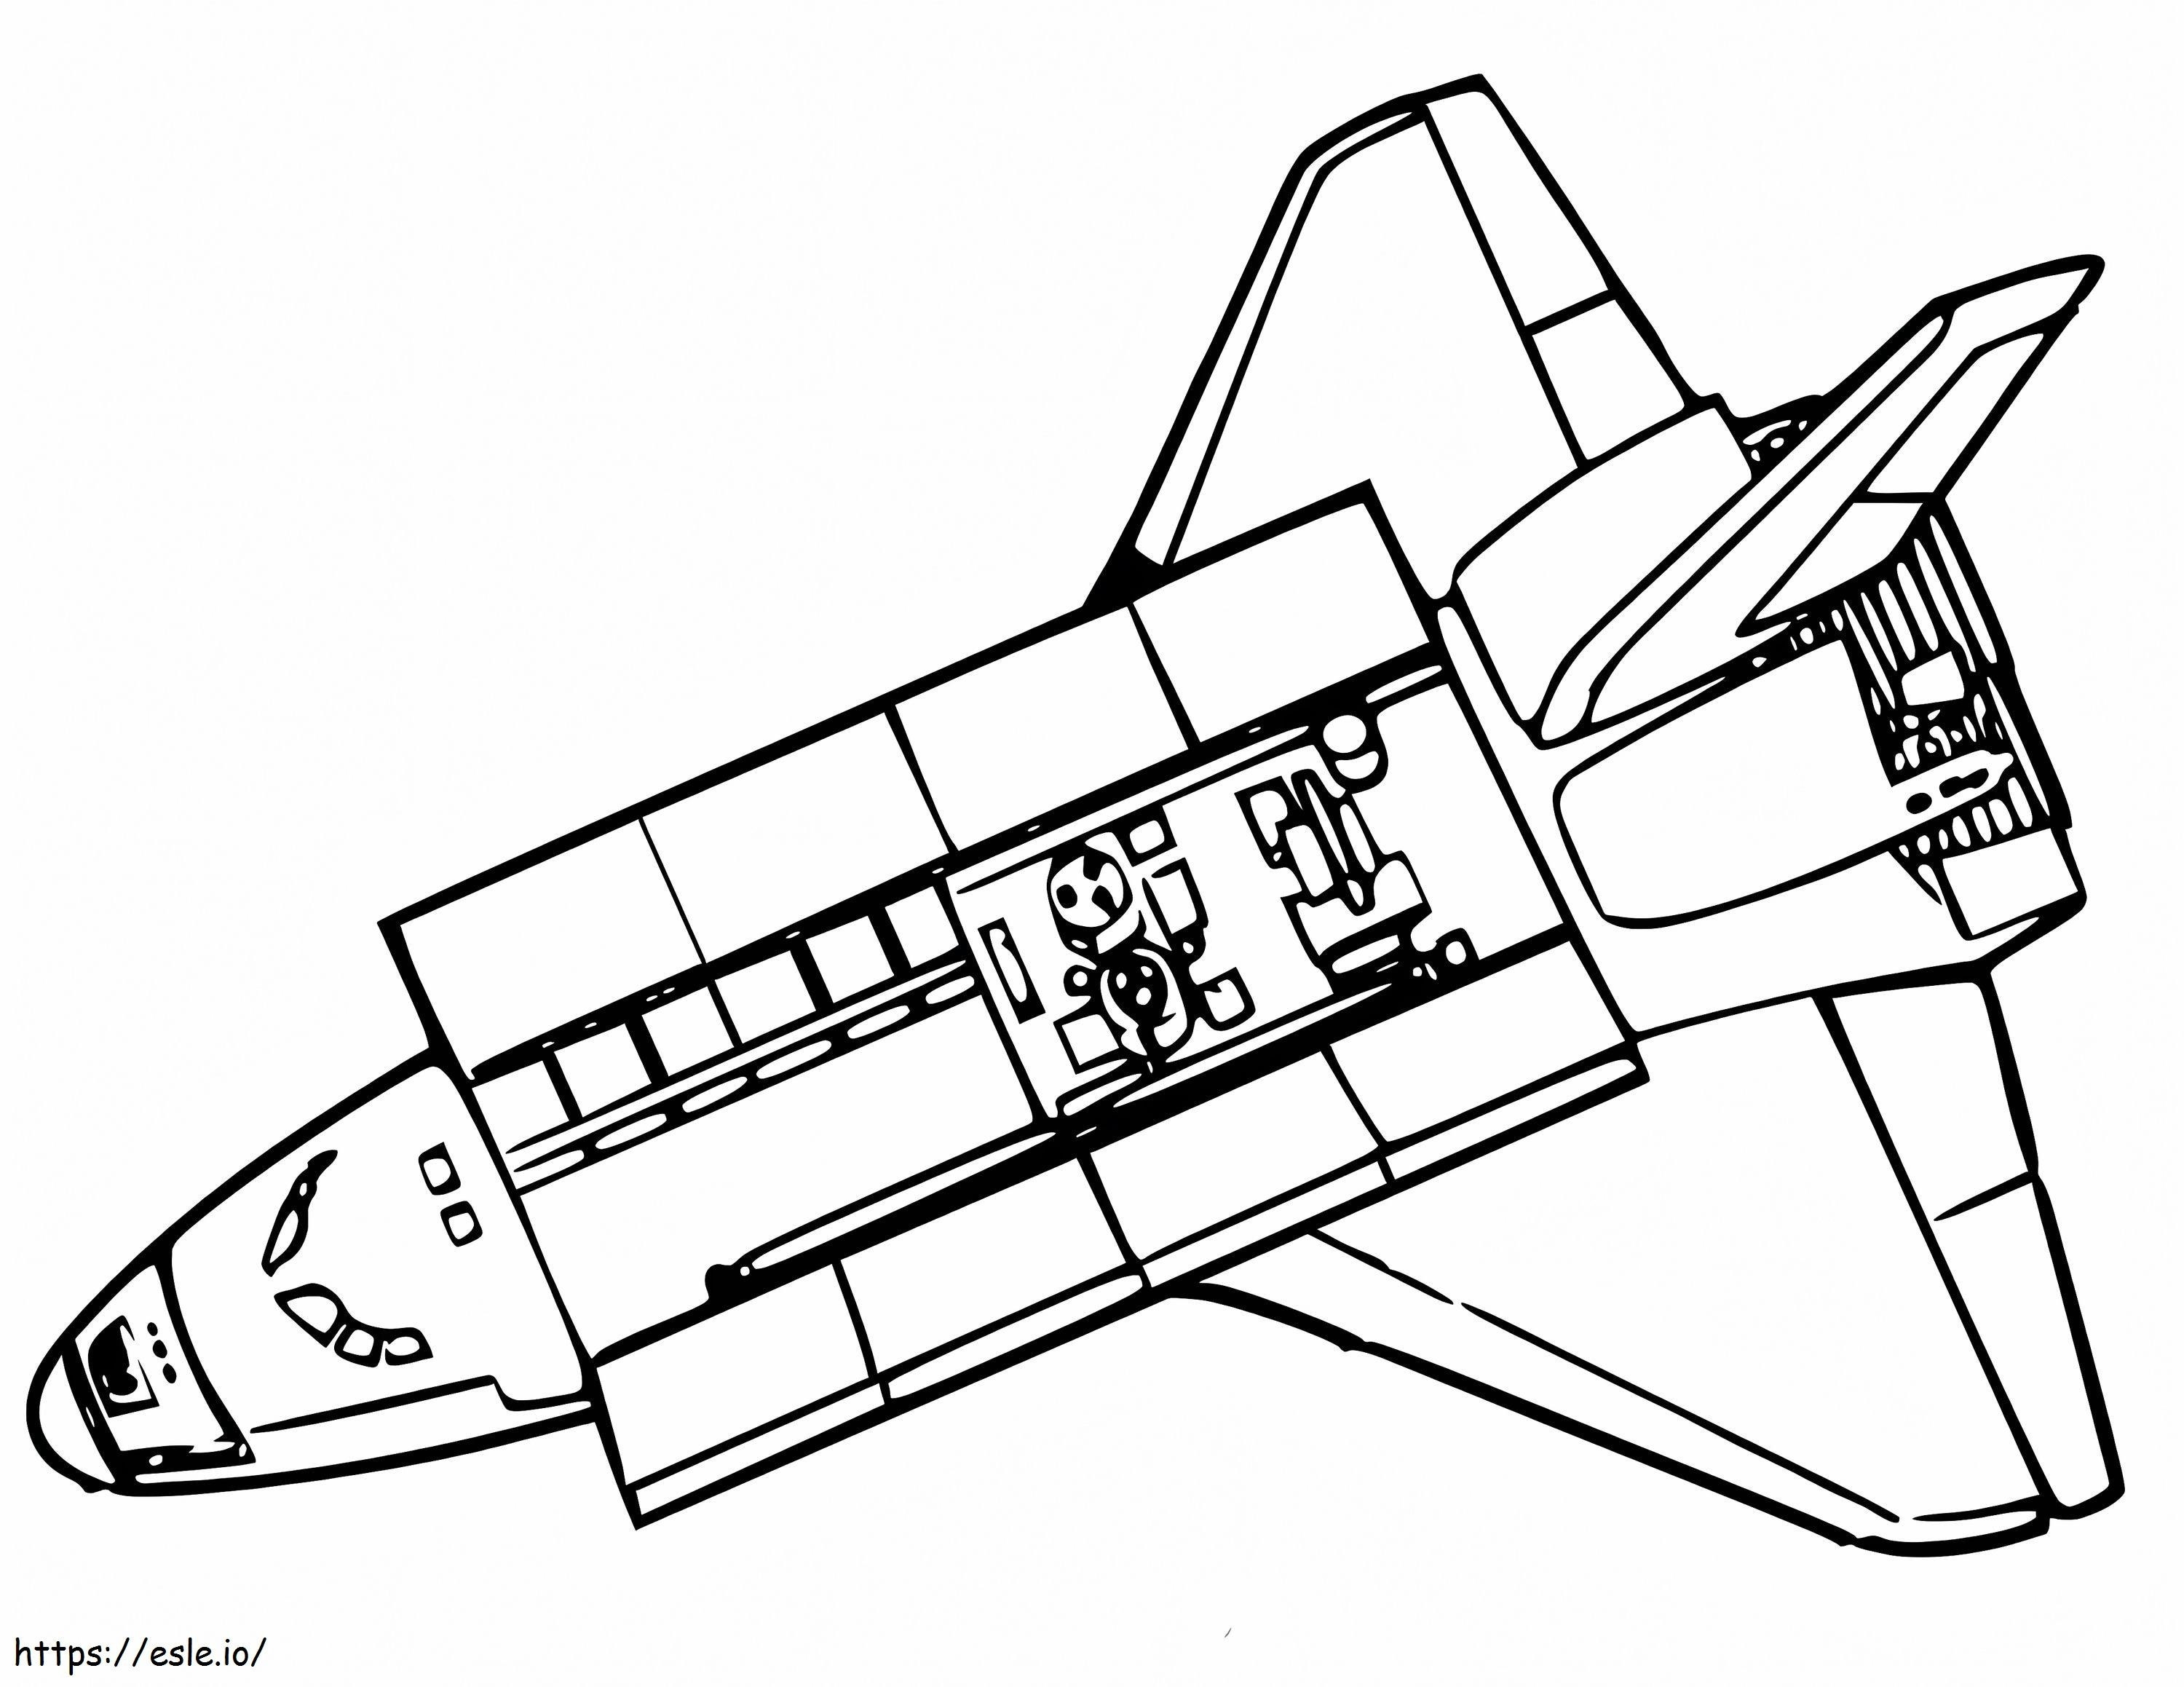 Printable Space Shuttle coloring page